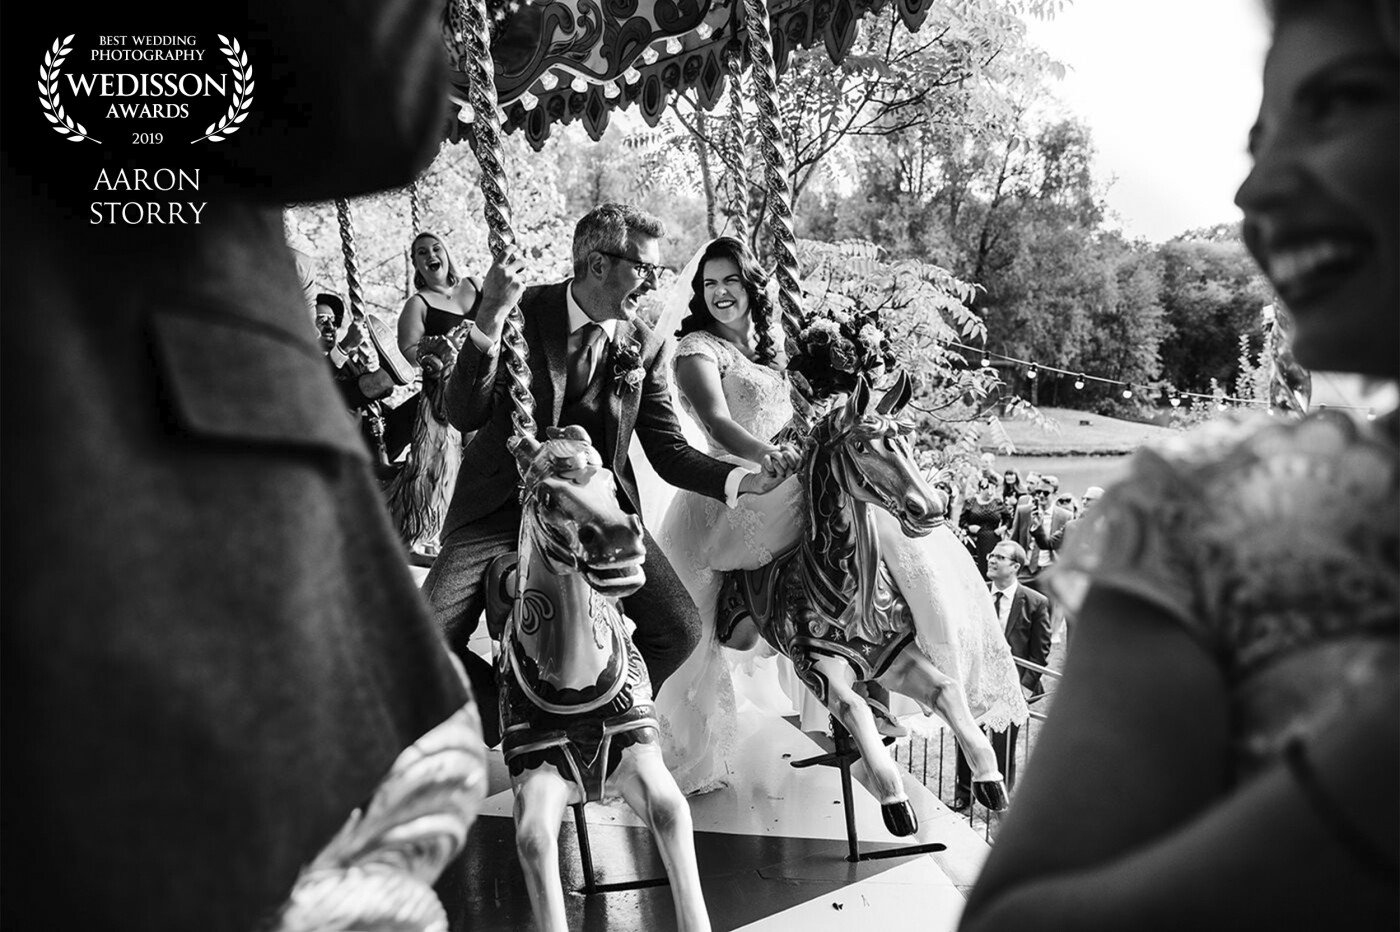 When Charlotte & Neil promised all the fun of the fair they literally meant it!<br />
This gorgeous couple hired in the most incredible merry go round to entertain their guests on their wedding day - but before opening it up to the kids they took it for a test drive. This amazing picture was taken as the ride was spinning at full speed! I love the quirkiness and uniqueness of their wedding - it was a please and joy to document.